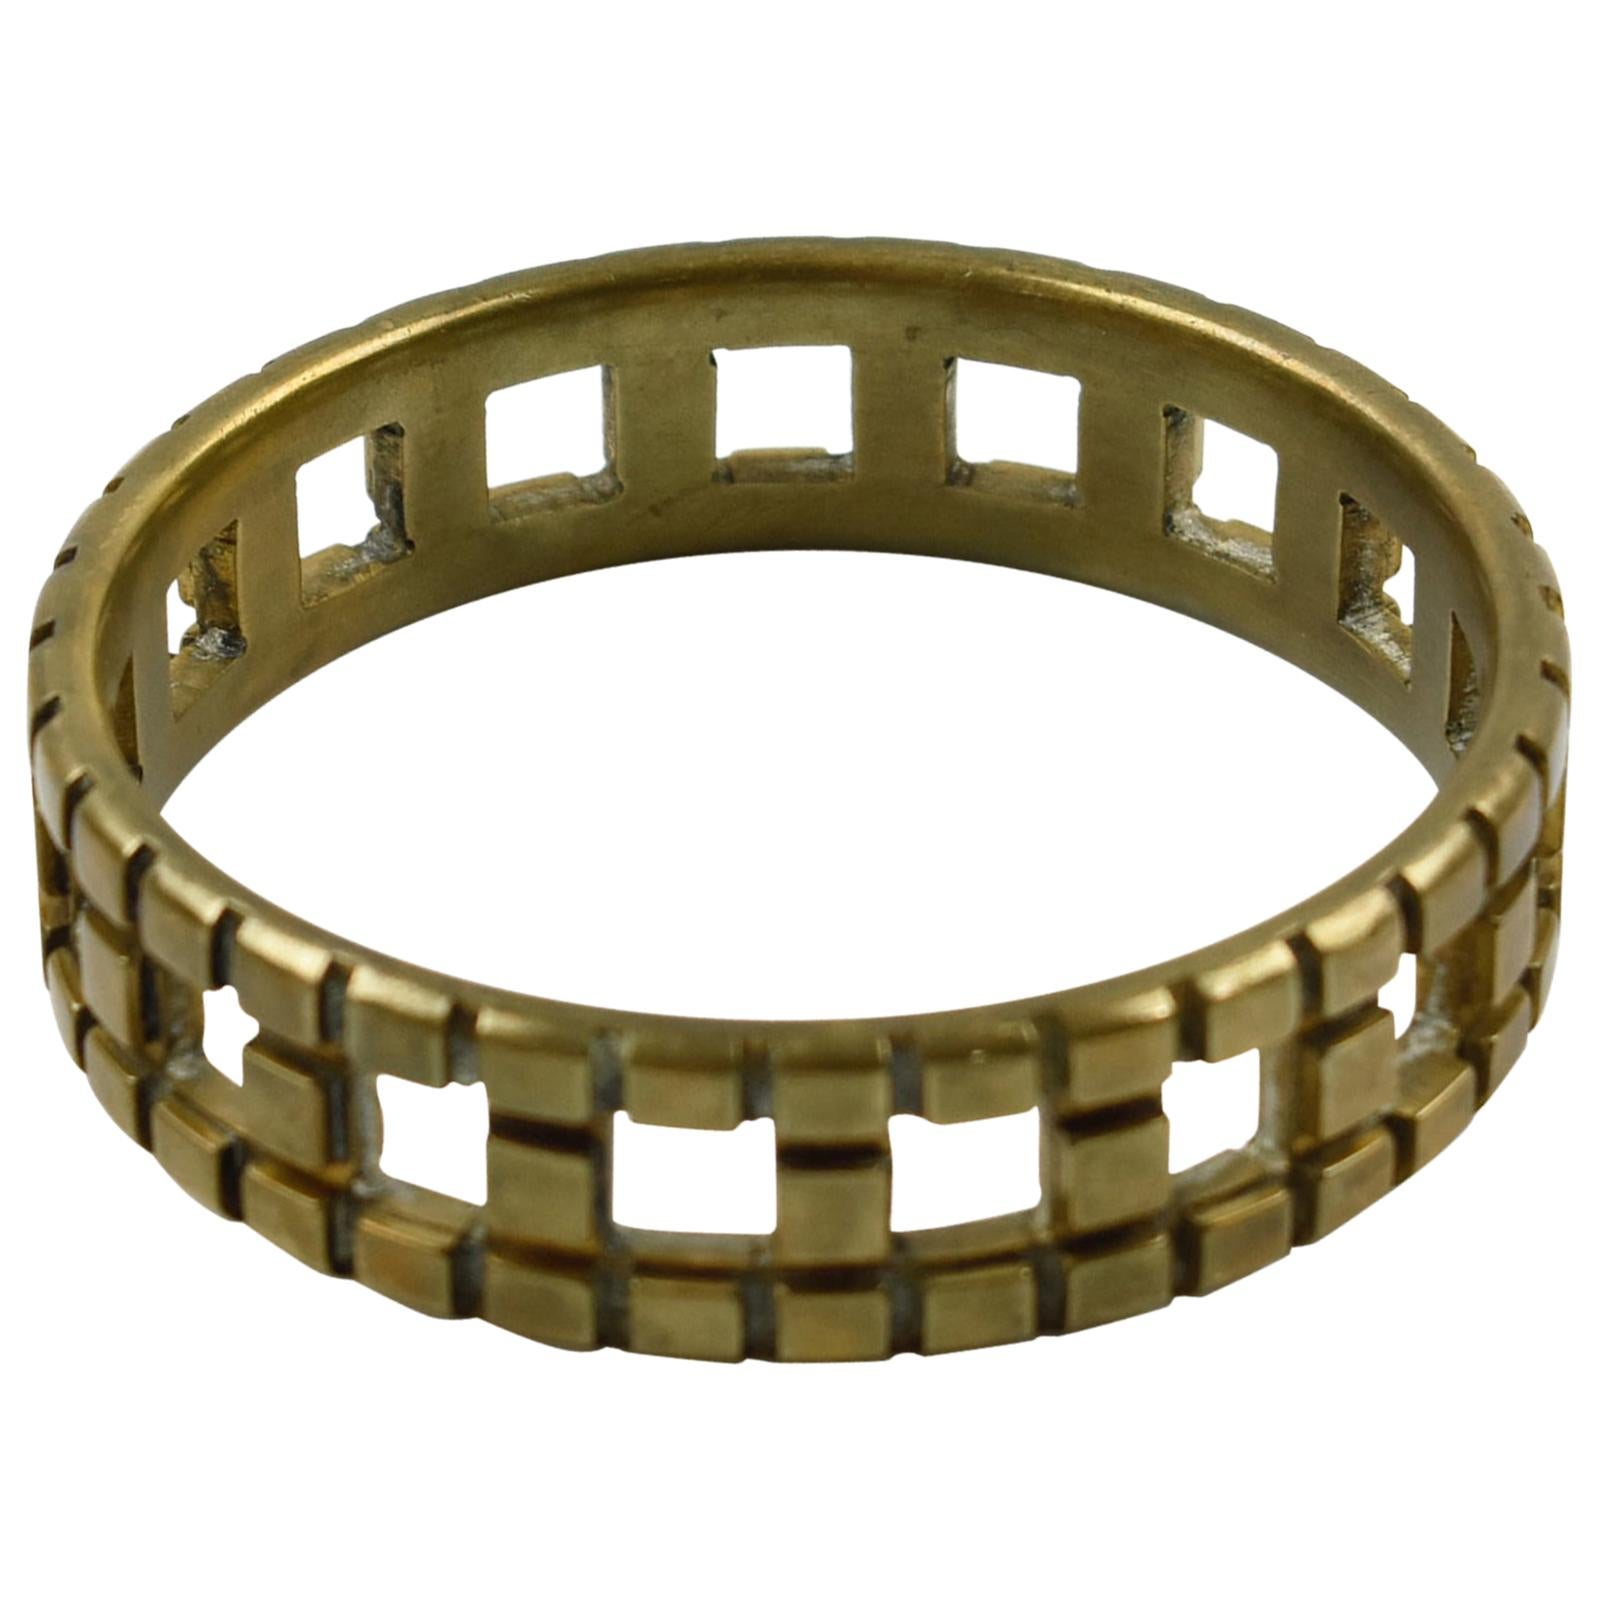 Stunning French artisan studio modernist bronze bracelet. Chunky bangle shape with a geometric see-thru design. There is no visible maker's mark.
Measurements: Inside across is 2.50 in. diameter (6.4 cm) - Width is 0.69 in. (1.8 cm).

Be sure to